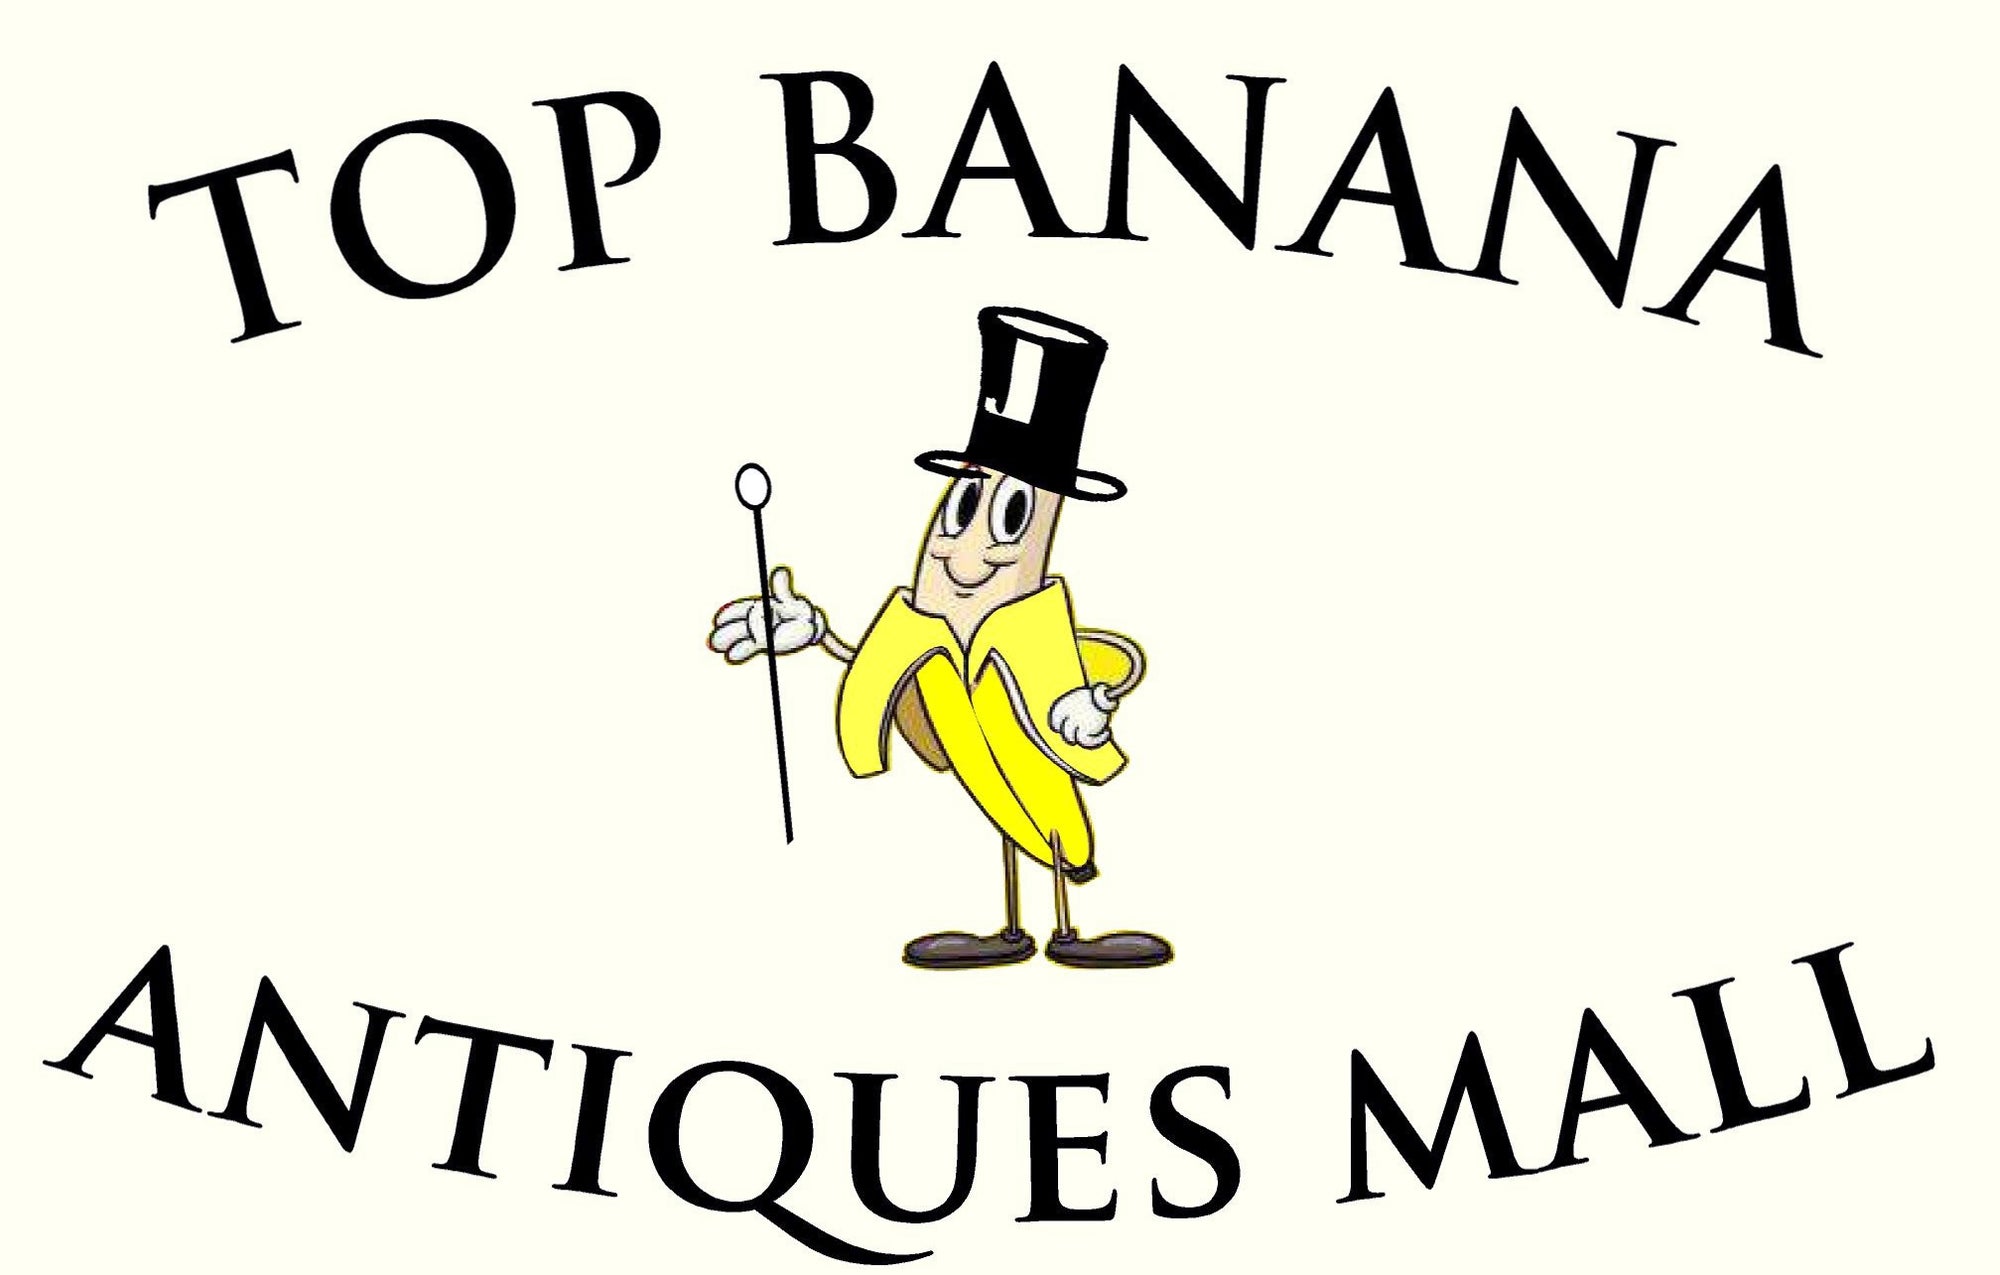 Top Banana Celebrity Antiques Road Trip Episode Airs Wednesday 7.00pm BBC 2